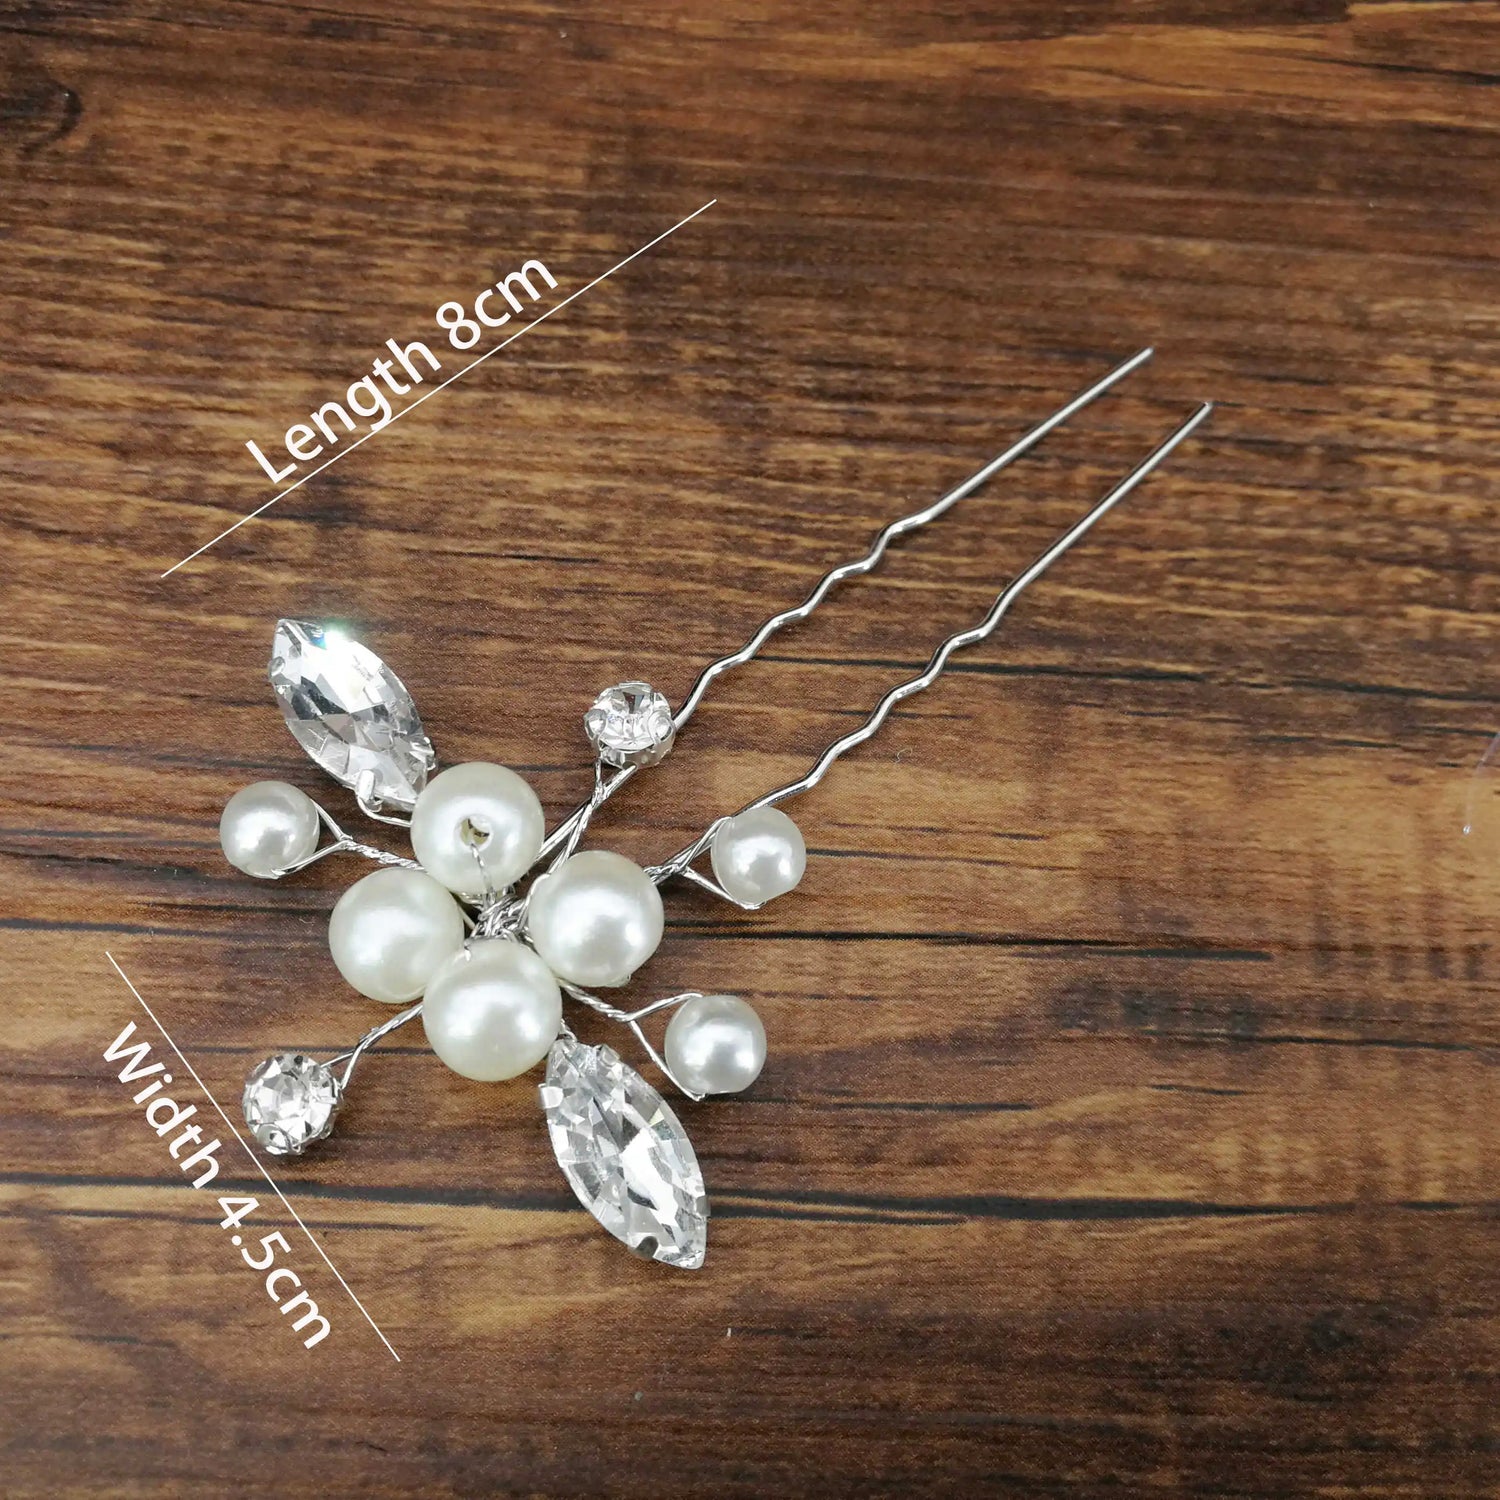 A-654 Bridal Hair Pin Collection - Pearls, Rhinestones, Flowers